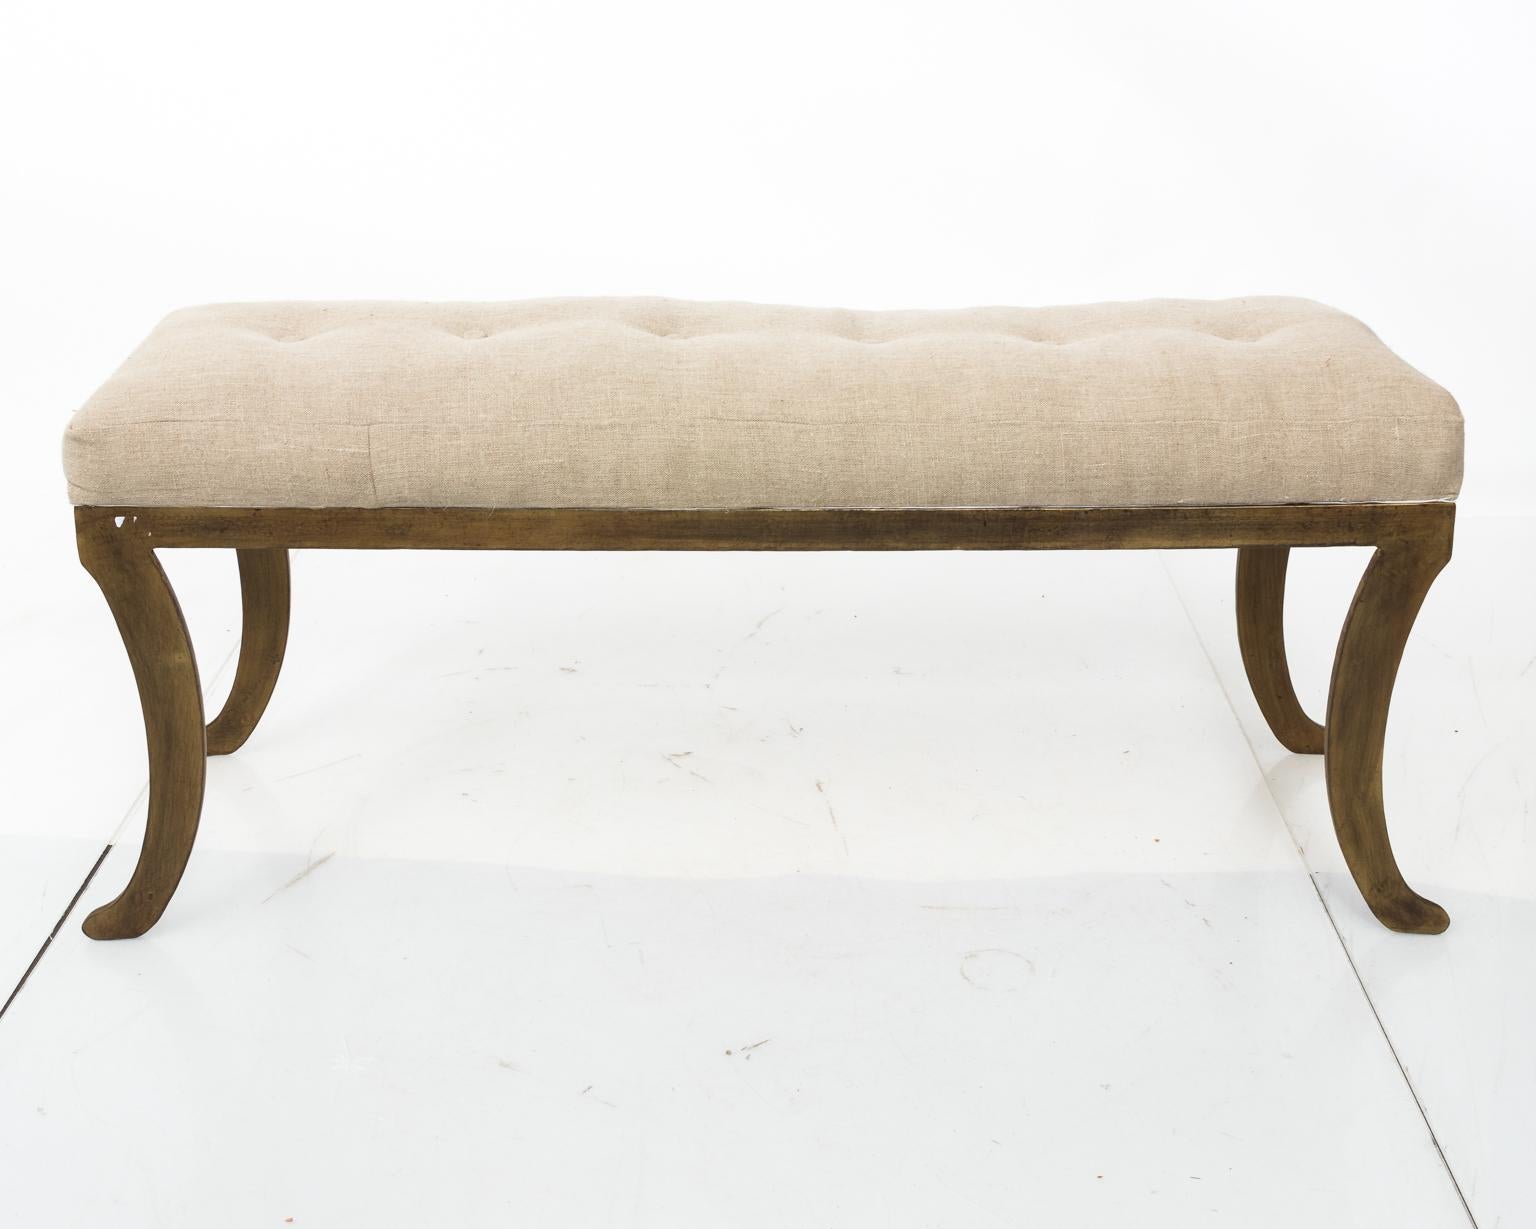 Splay legged Iron long bench with tufted upholstery, circa late 20th century